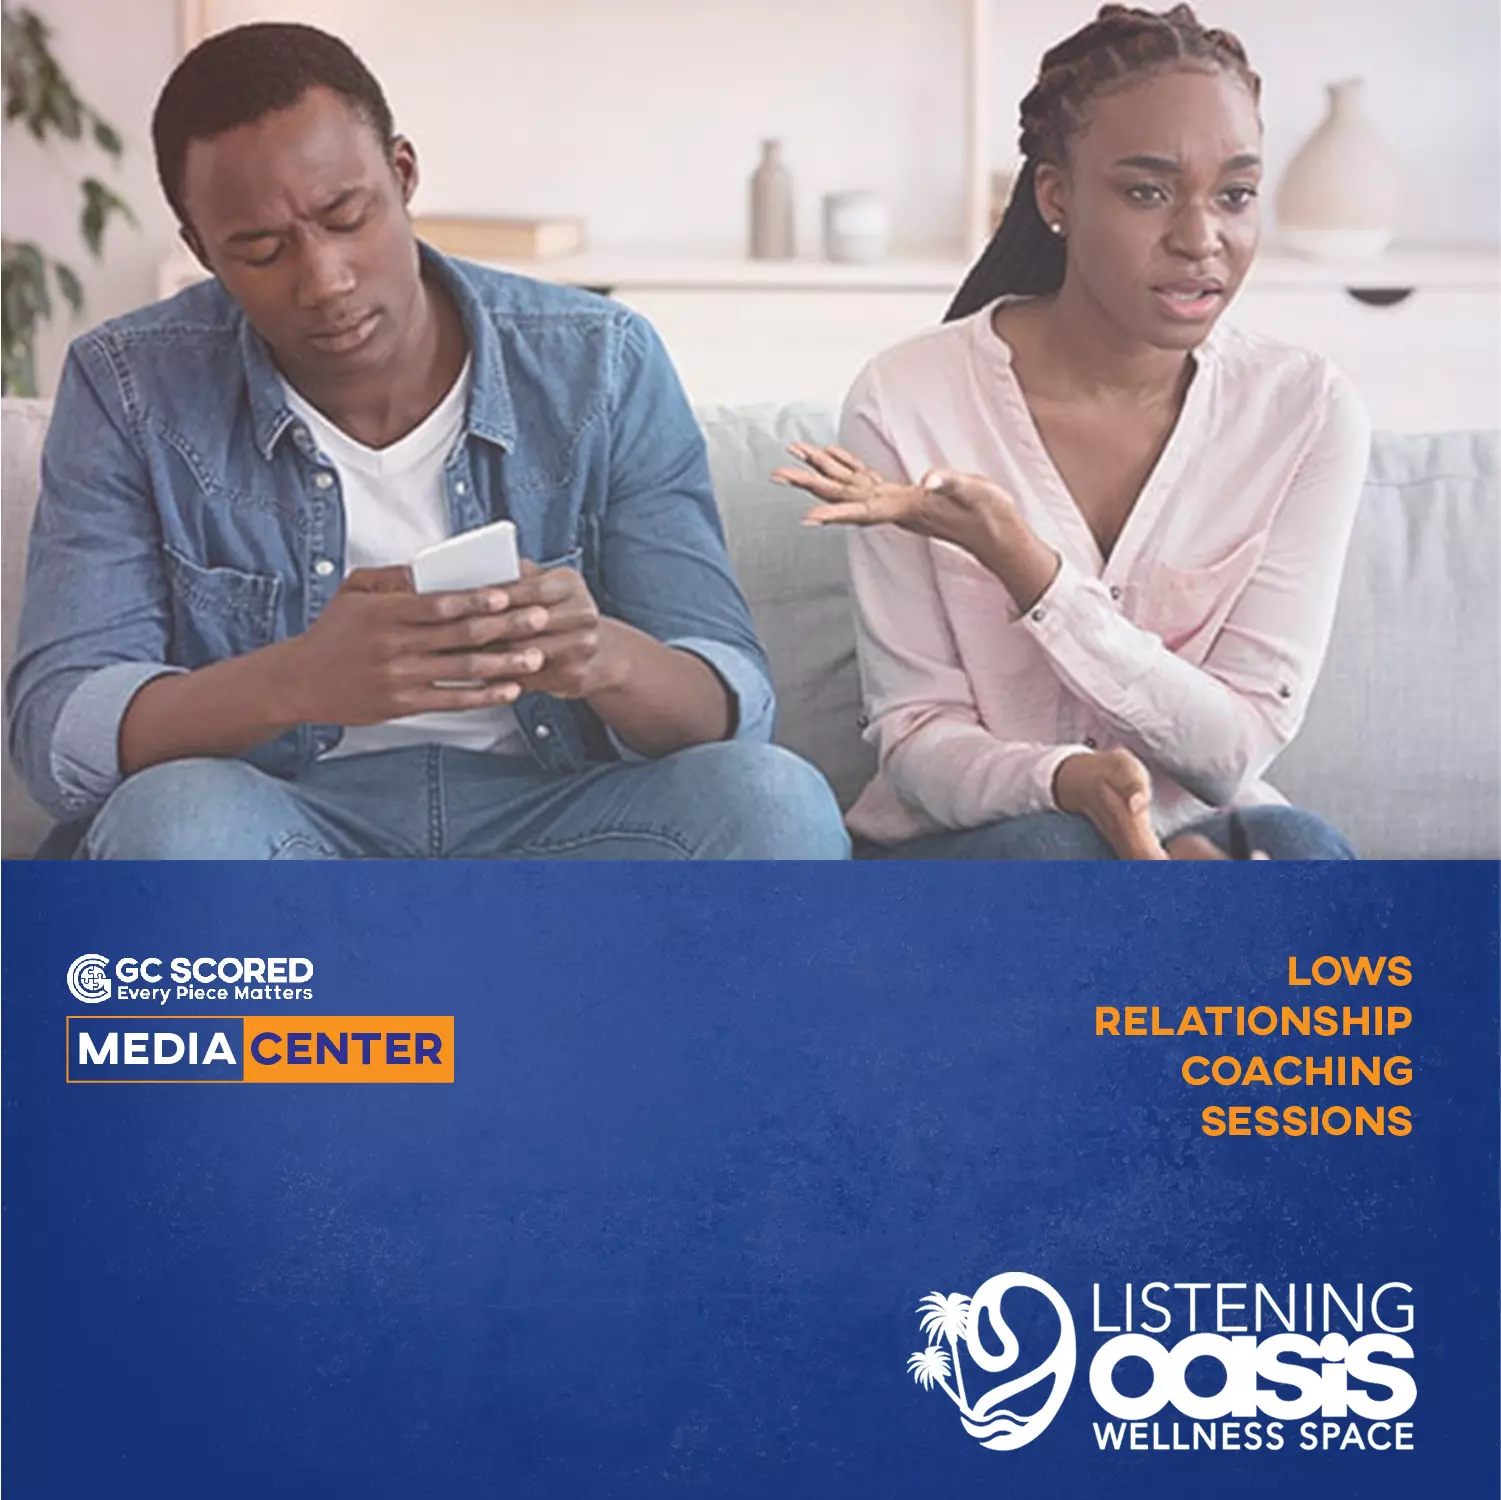 LOWS-Relationship Coaching Sessions